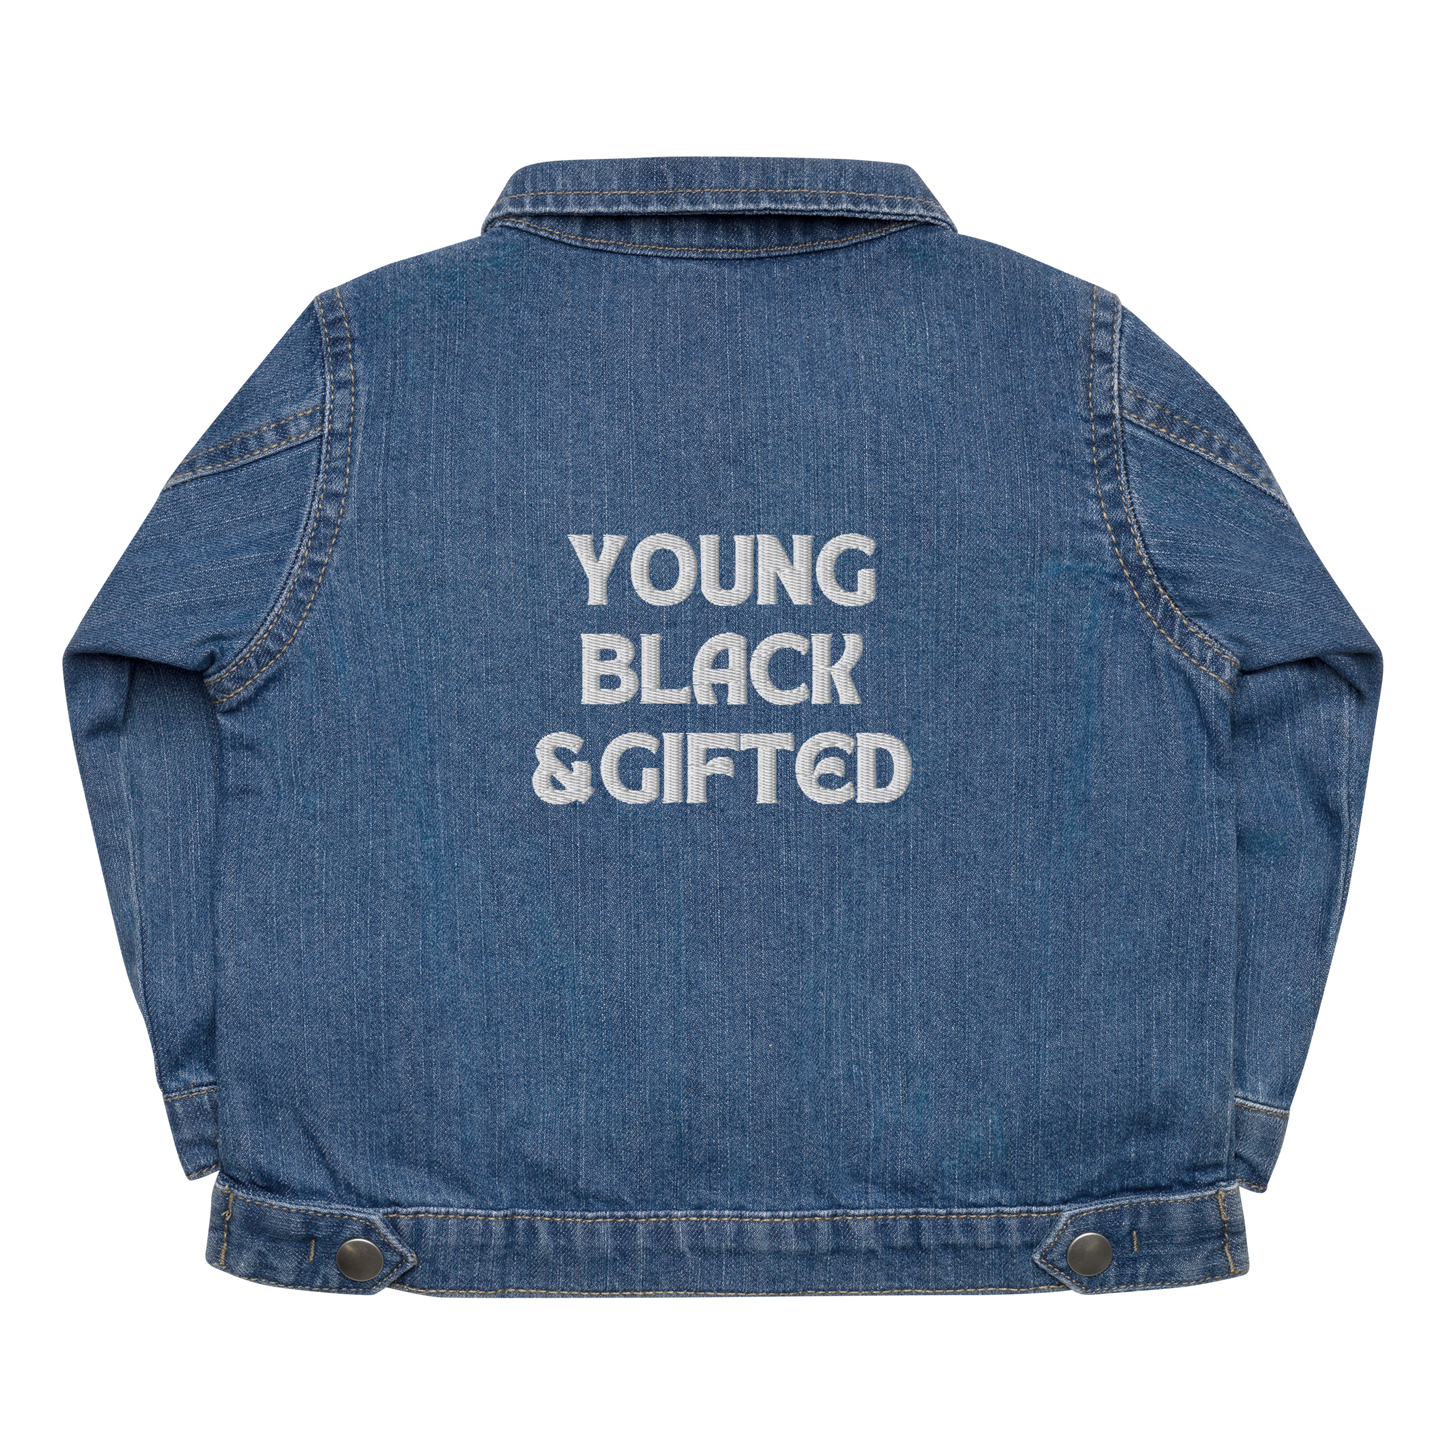 Young, Black & Gifted Baby Organic Denim Jacket